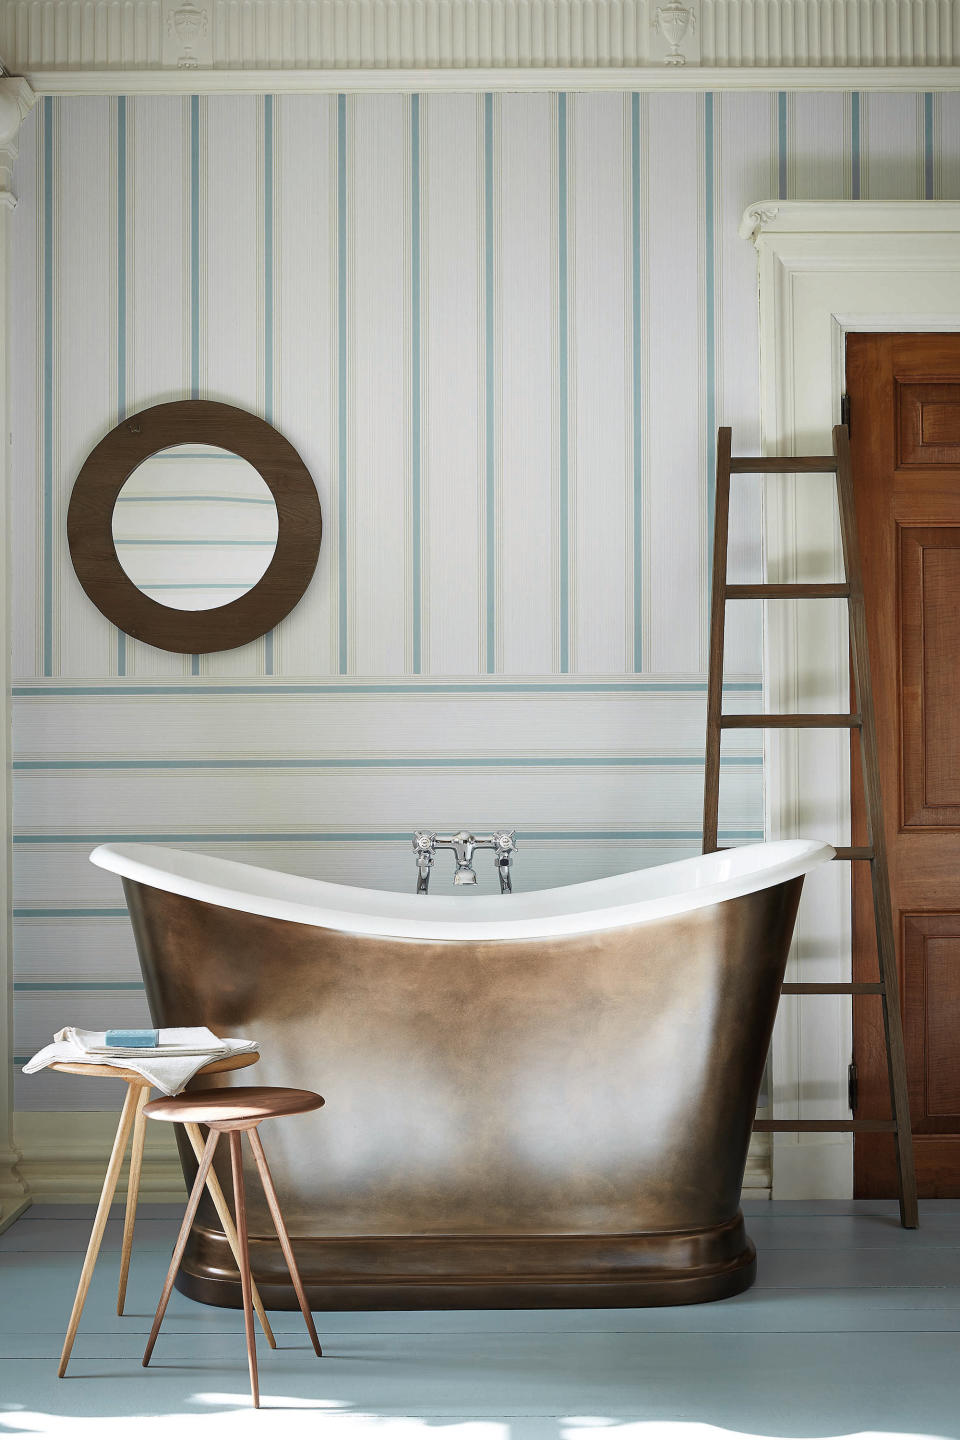 <p> A freestanding bath is a classic in country bathrooms, and can feature in a smaller ensuite as well as a larger family space. </p> <p> ‘With careful planning, even small bathrooms can play host to a freestanding bath’ says Phil Etherden, managing director at The Albion Bath Company. Our compact Tubby Too design is available in three lengths – all comfortably deep – and looks just as elegant positioned against a wall as it does in the middle of the room. Combine with one of our overhead shower systems for day-to-day practicality’.  </p>